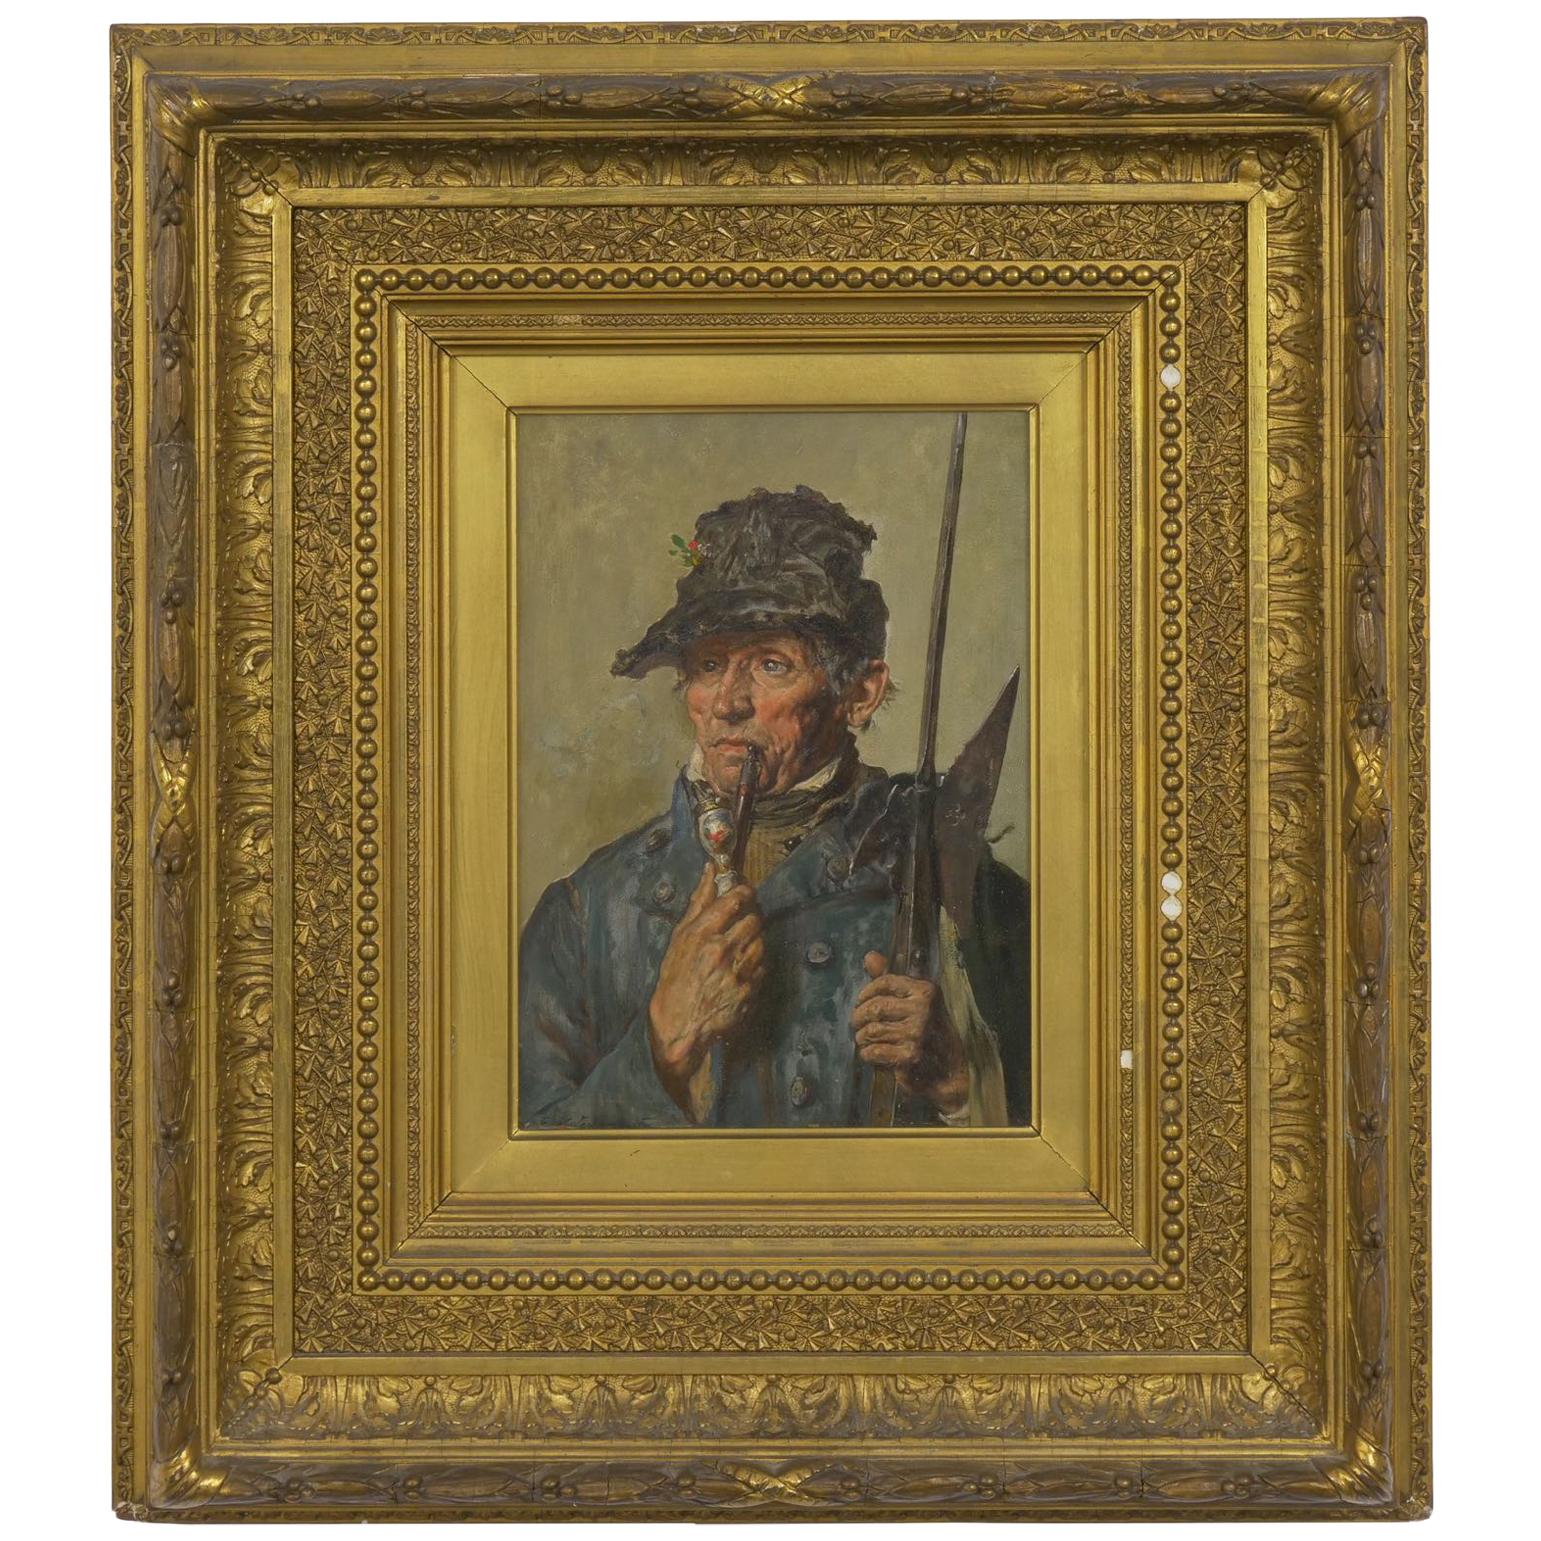 19th Century Oil Painting of a “16th Century Pikeman” Soldier's Portrait